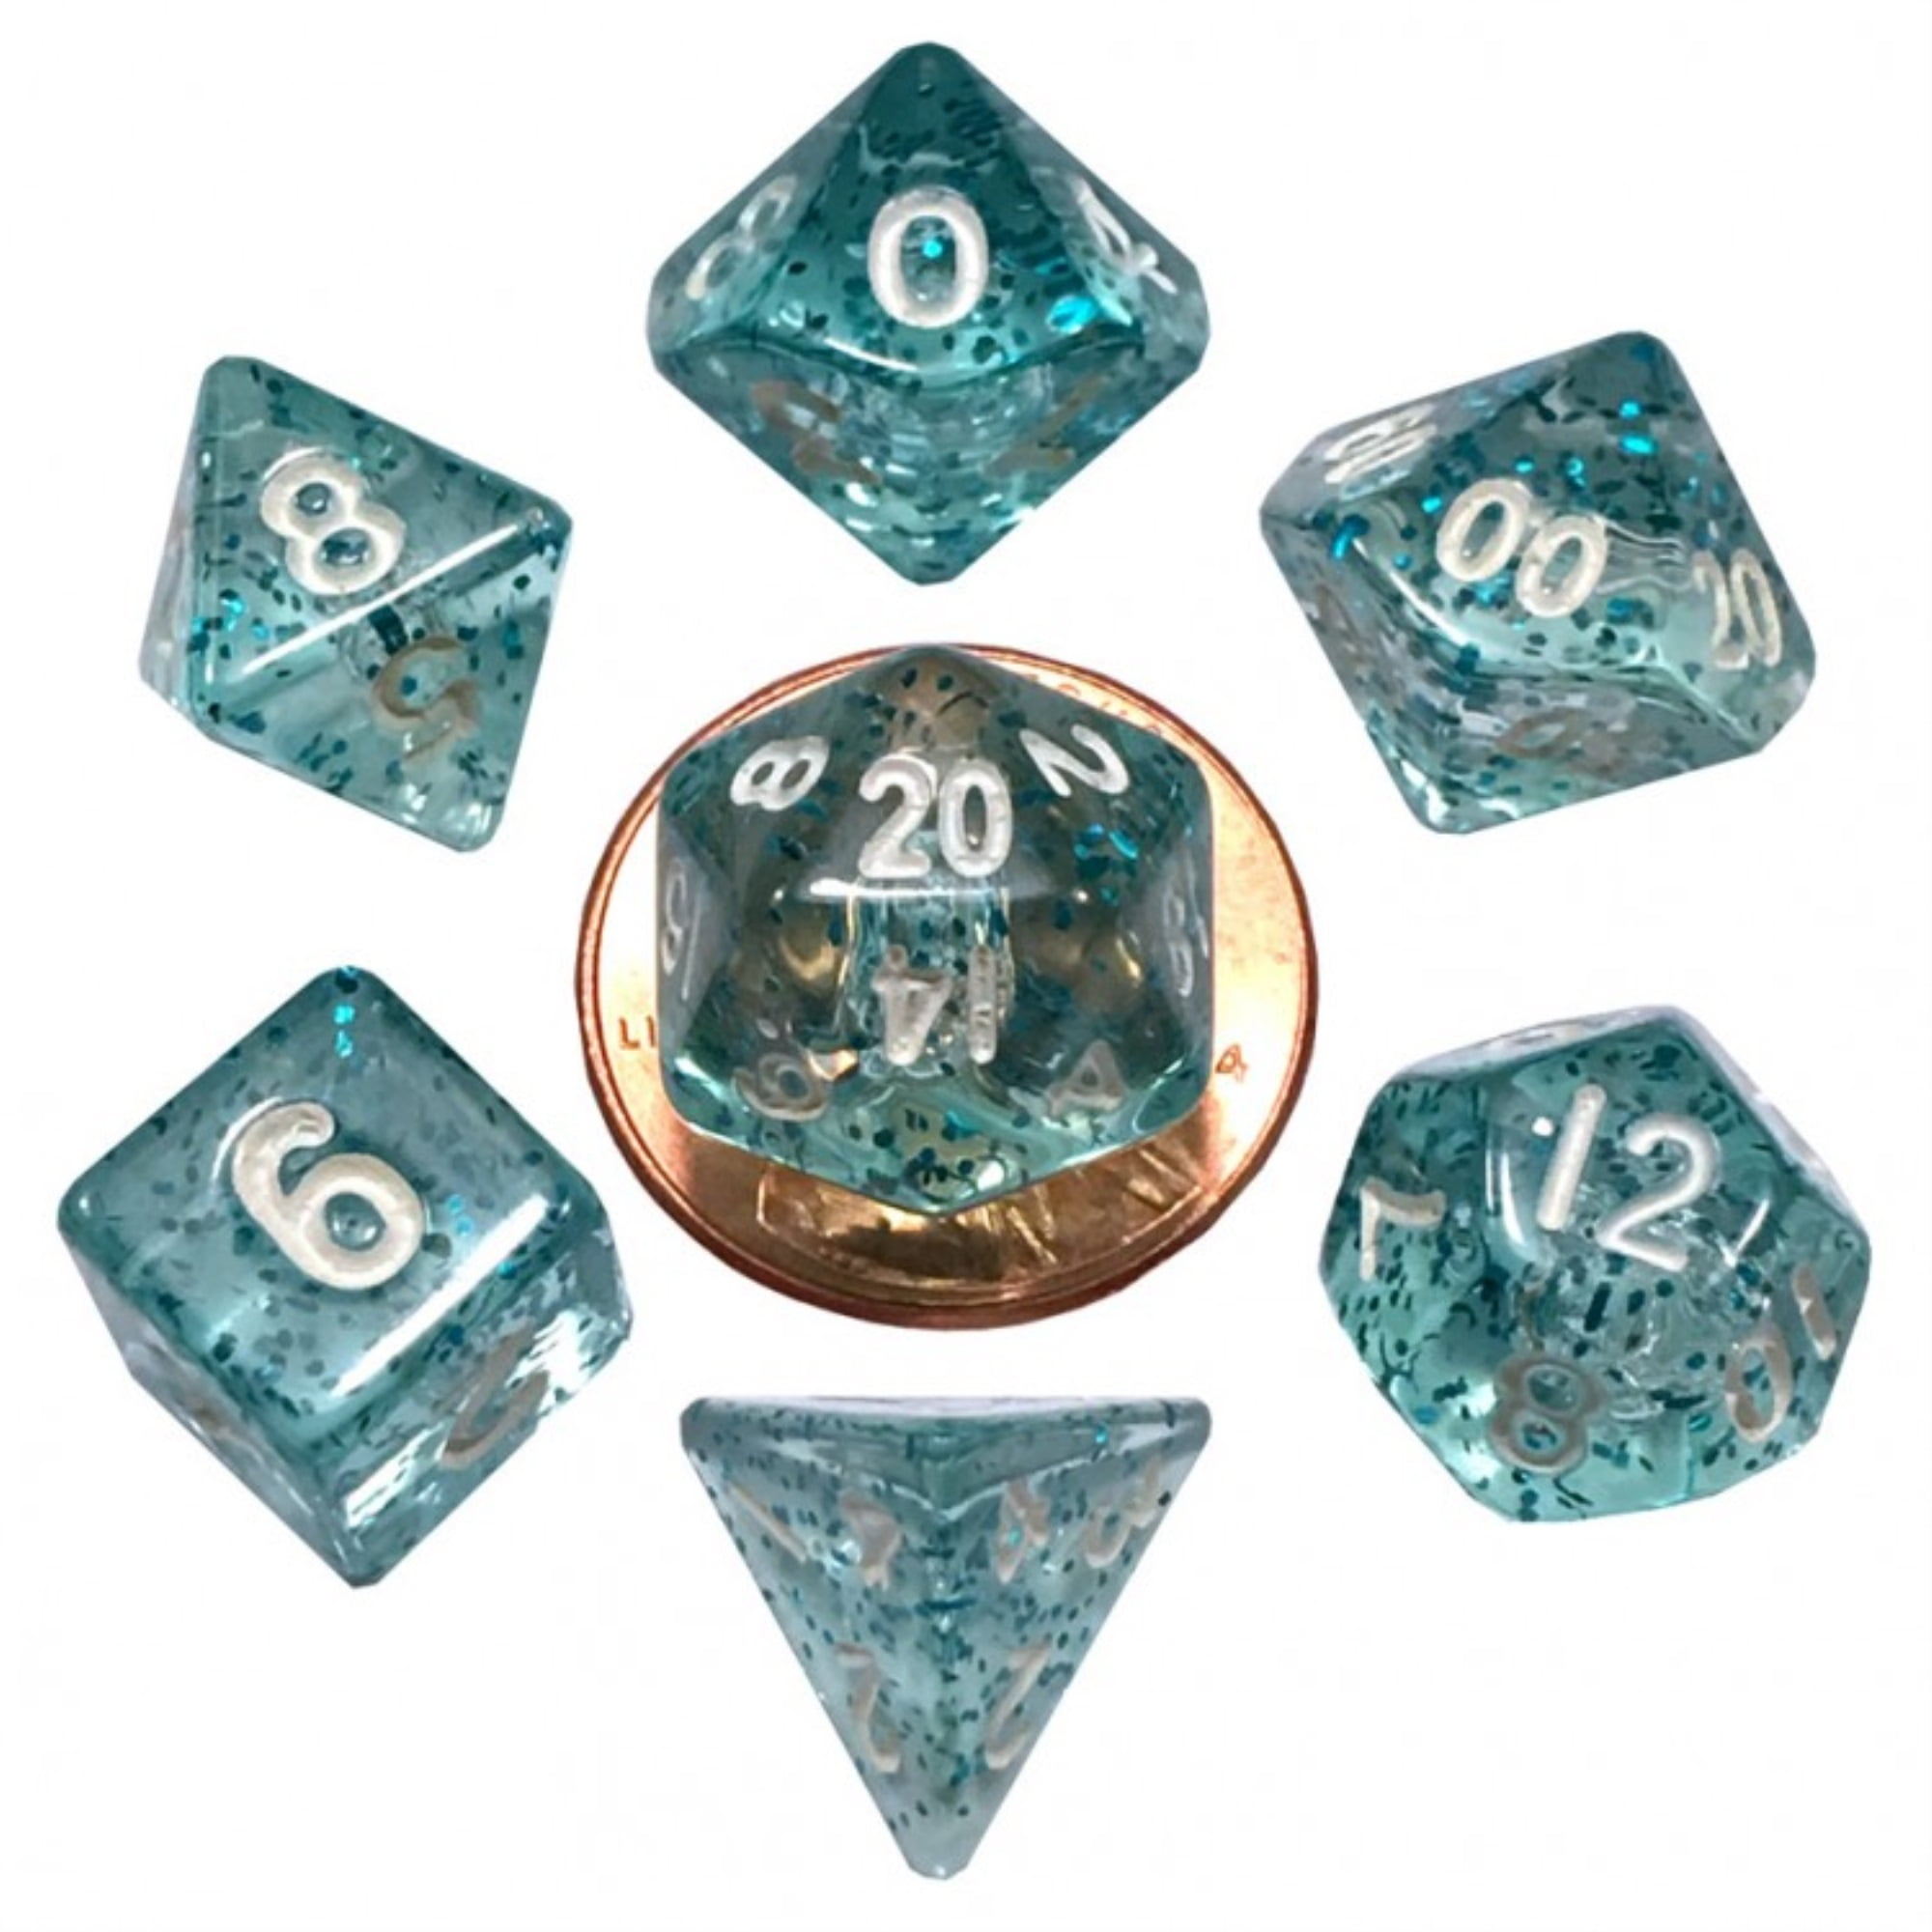 10 Mm 7 Set Mini Ethereal Light Blue With White Numbers